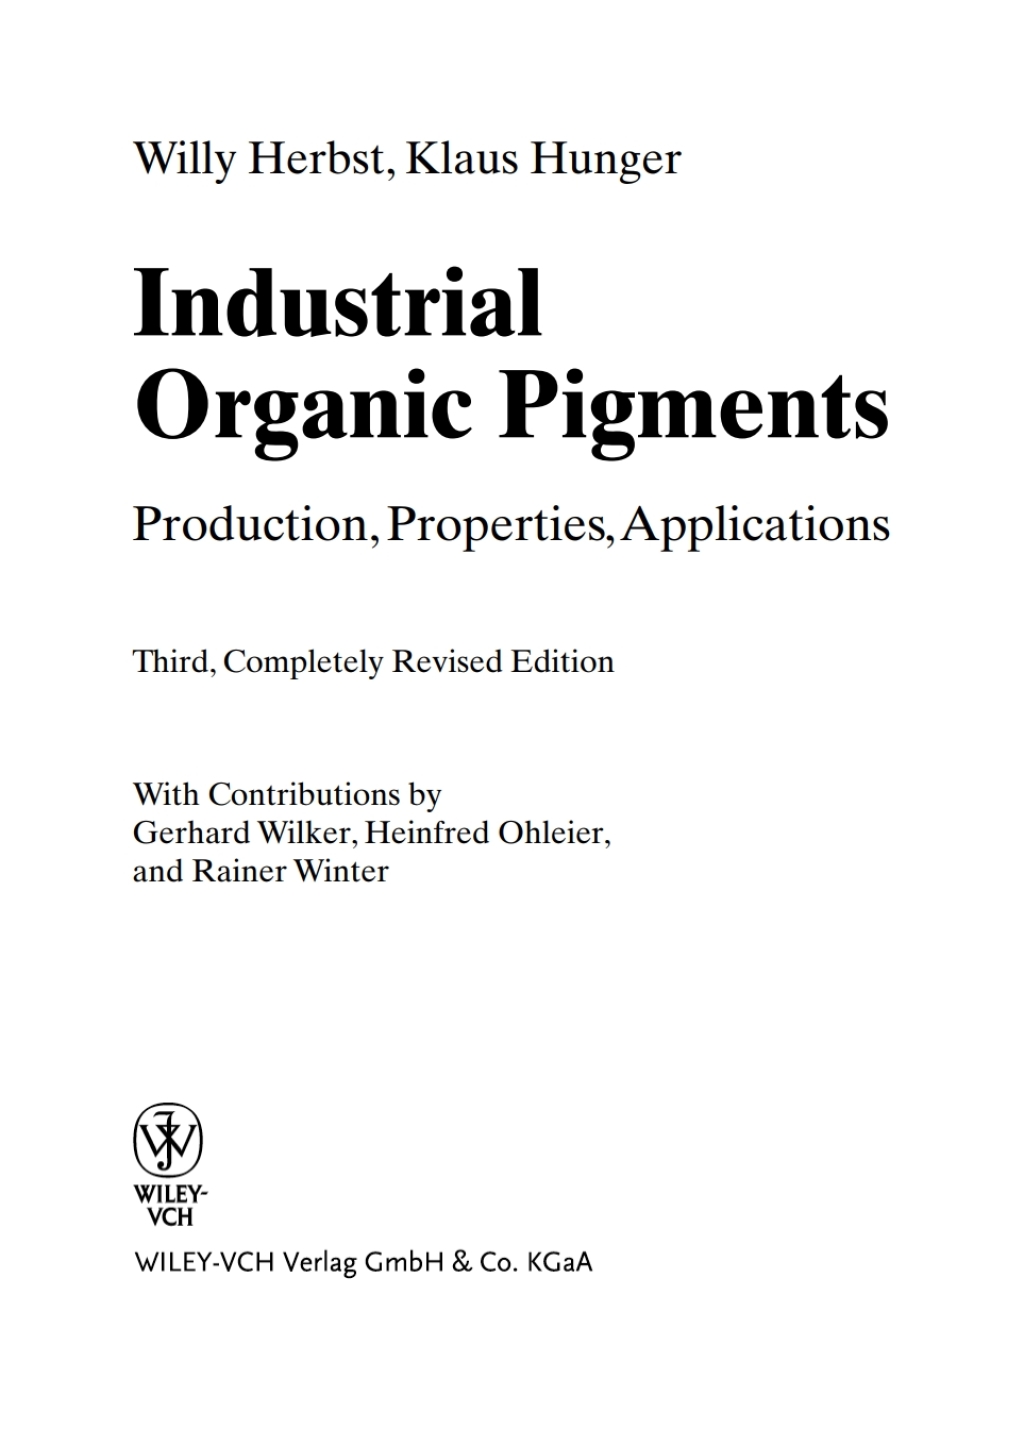 Industrial Organic Pigments: Production  Properties  Applications - 3rd Edition (eBook)